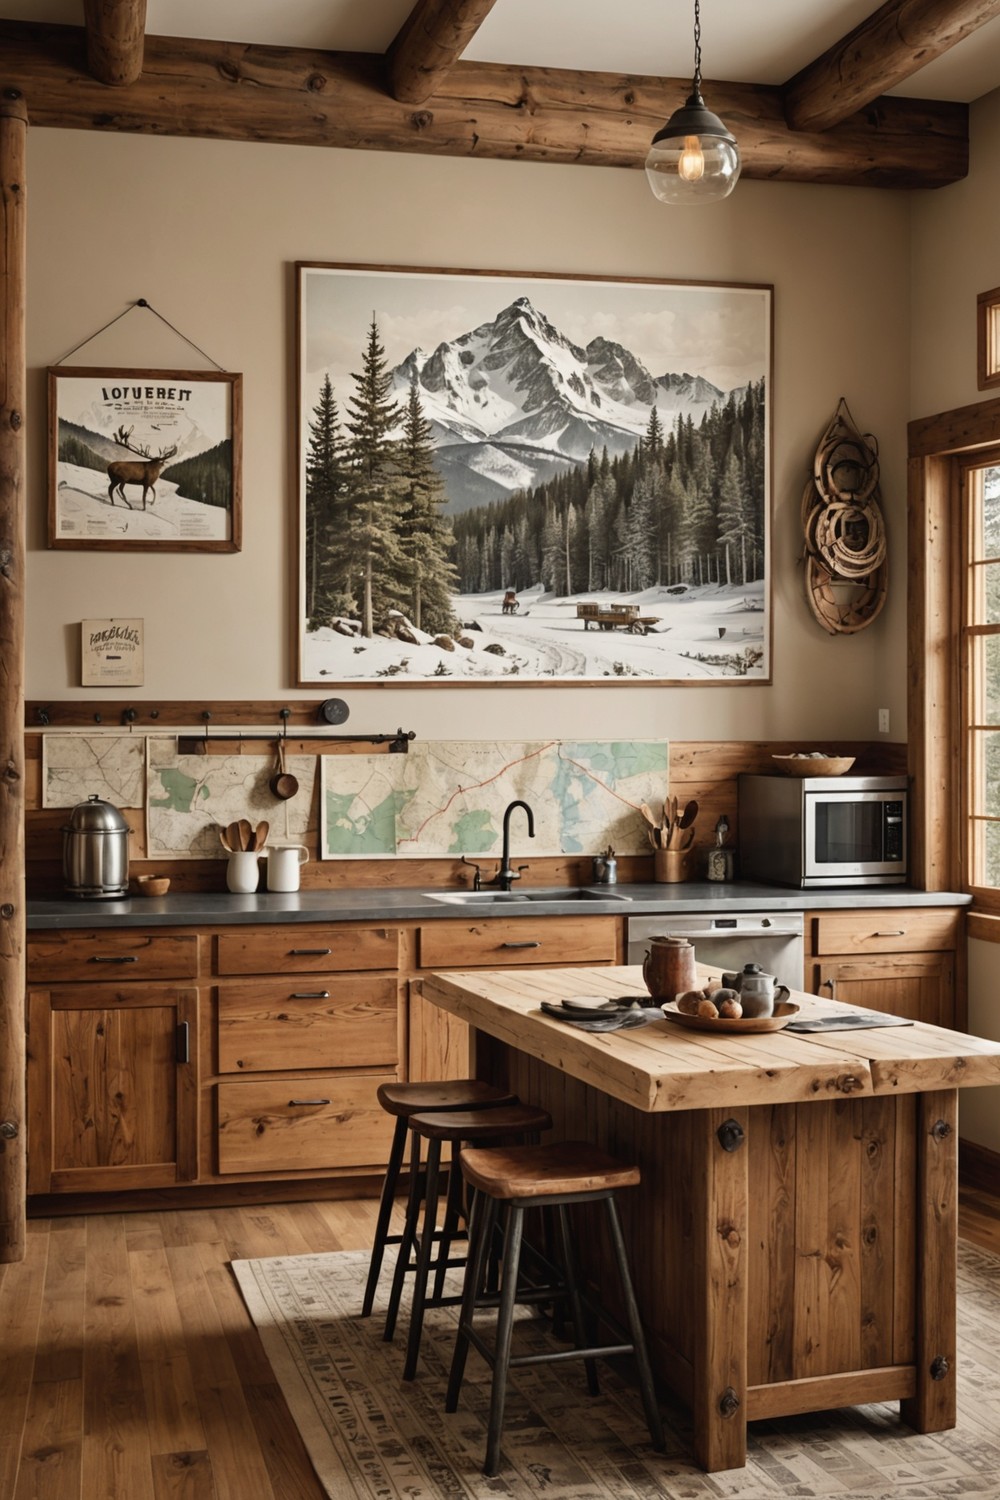 Mountain-Inspired Wall Art and Decor